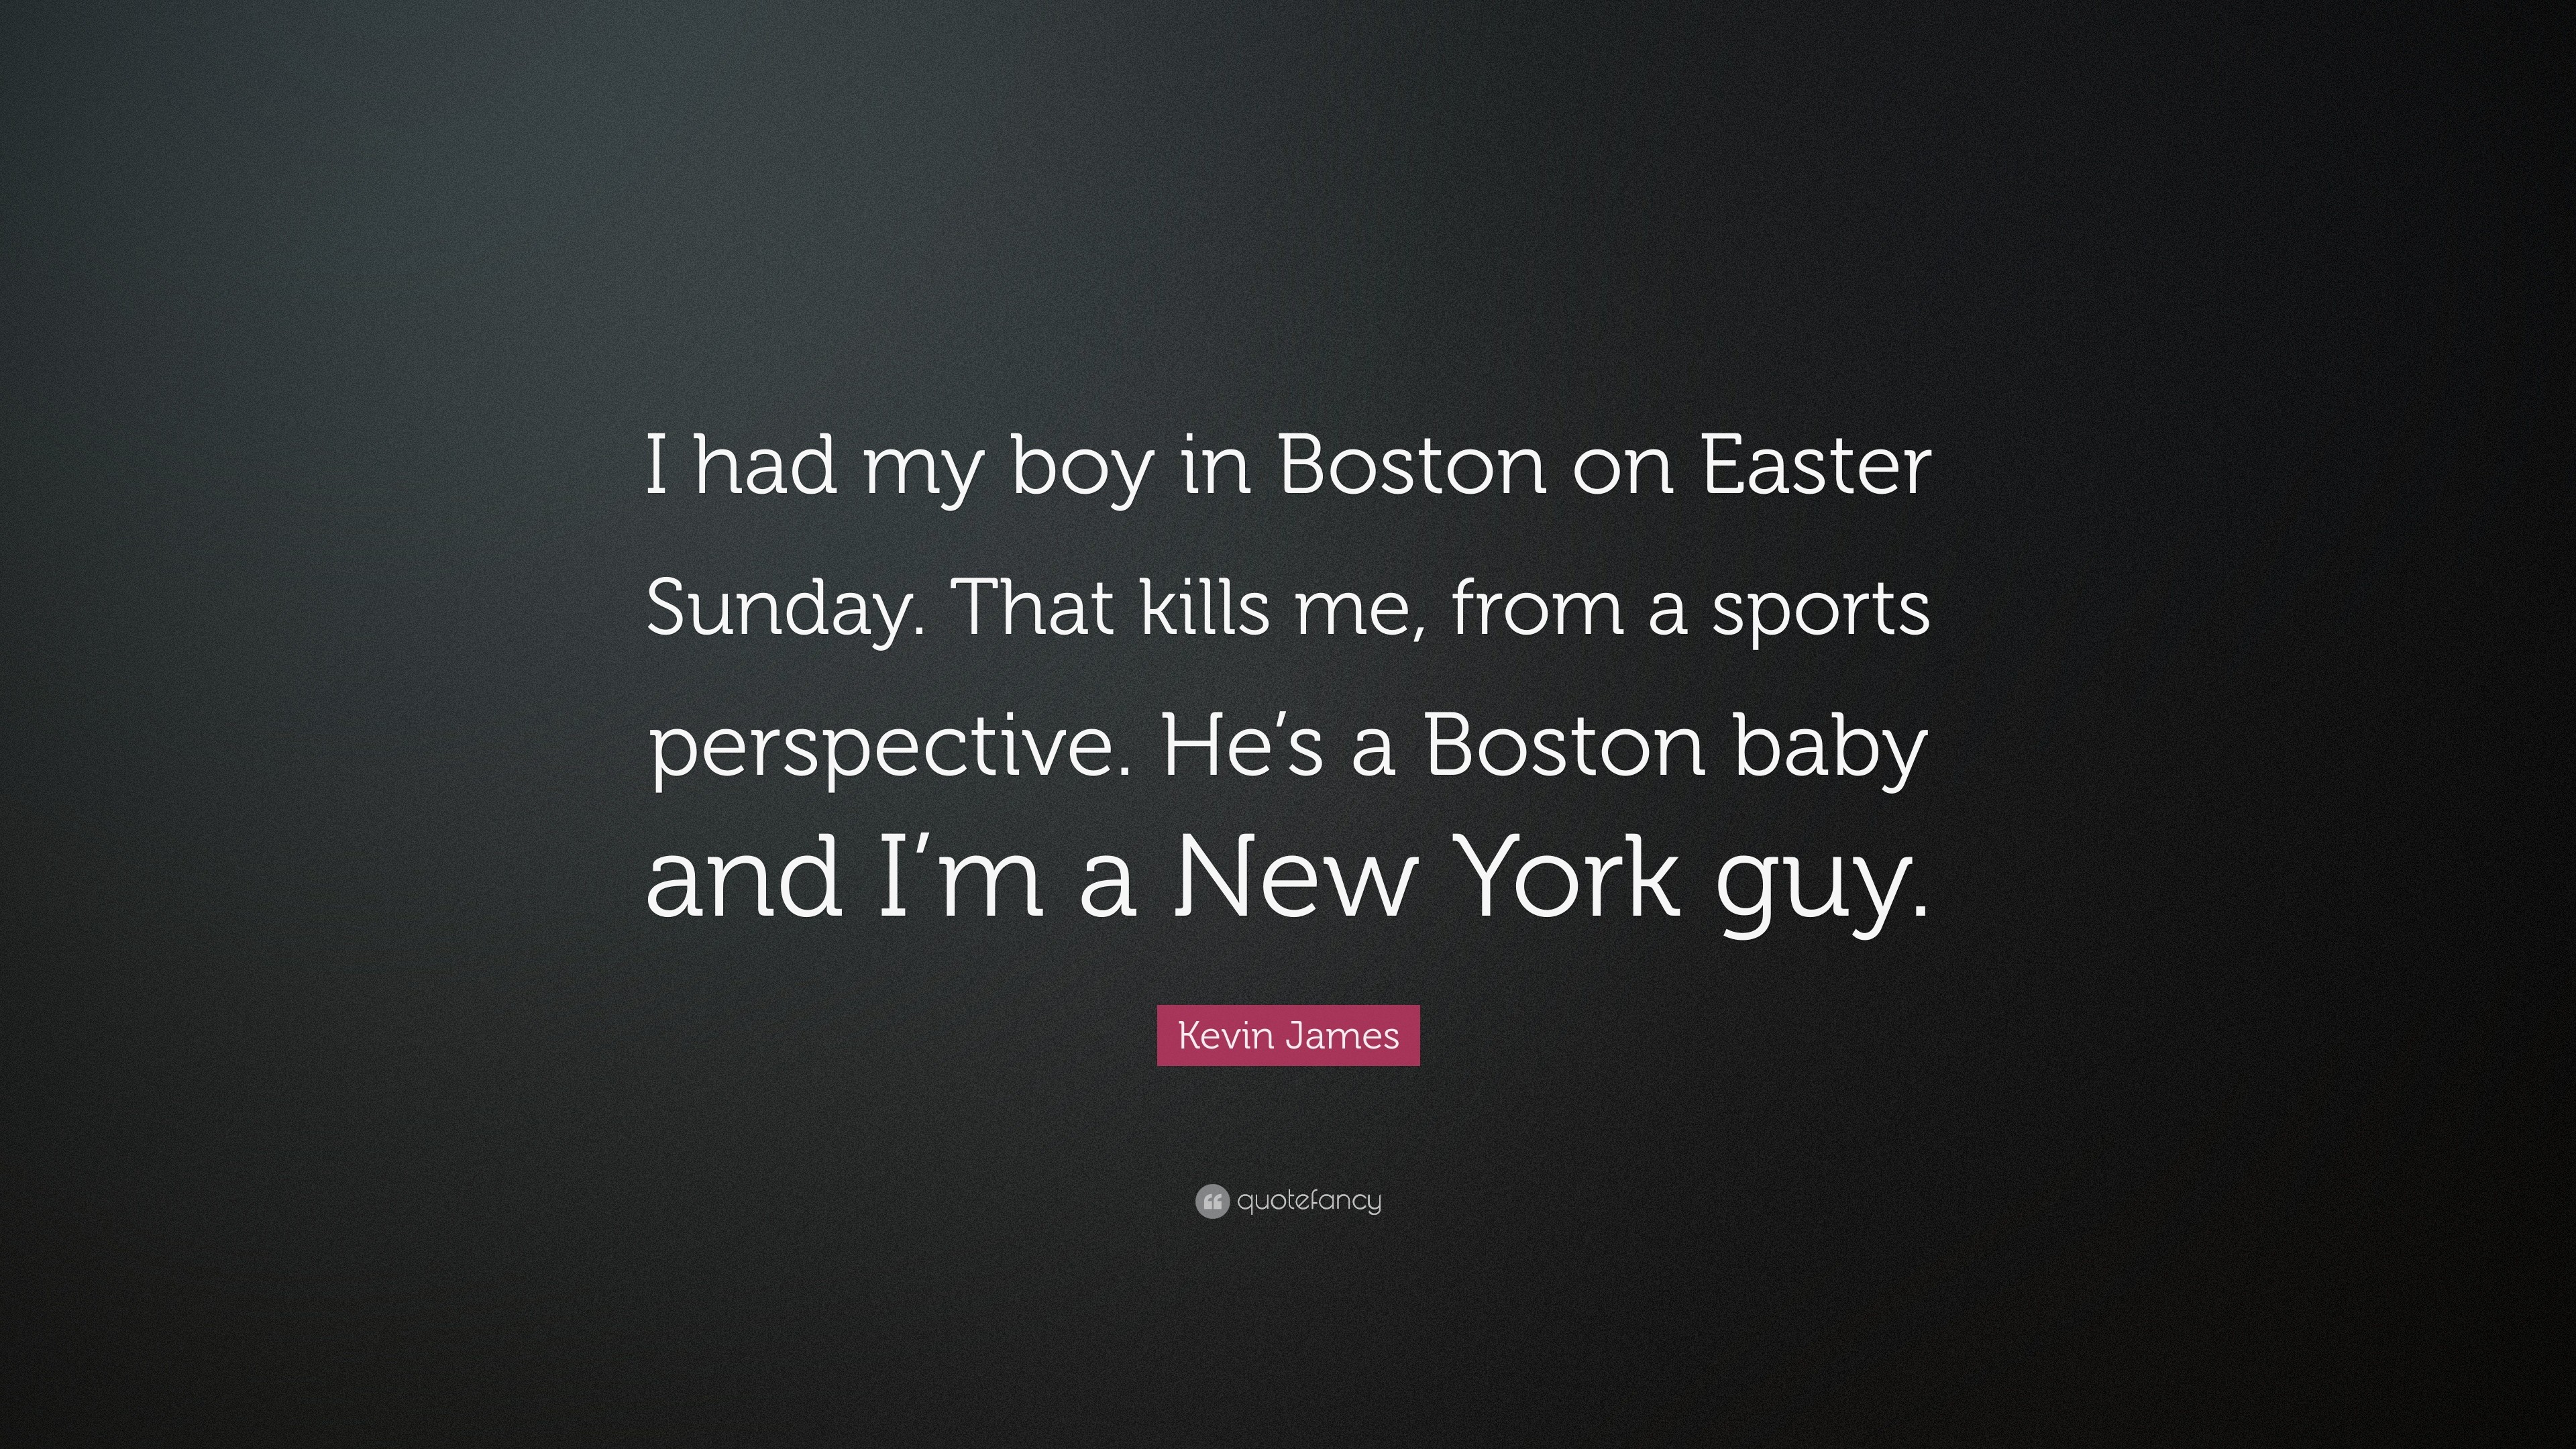 3840x2160 Kevin James Quote: “I had my boy in Boston on Easter Sunday. That